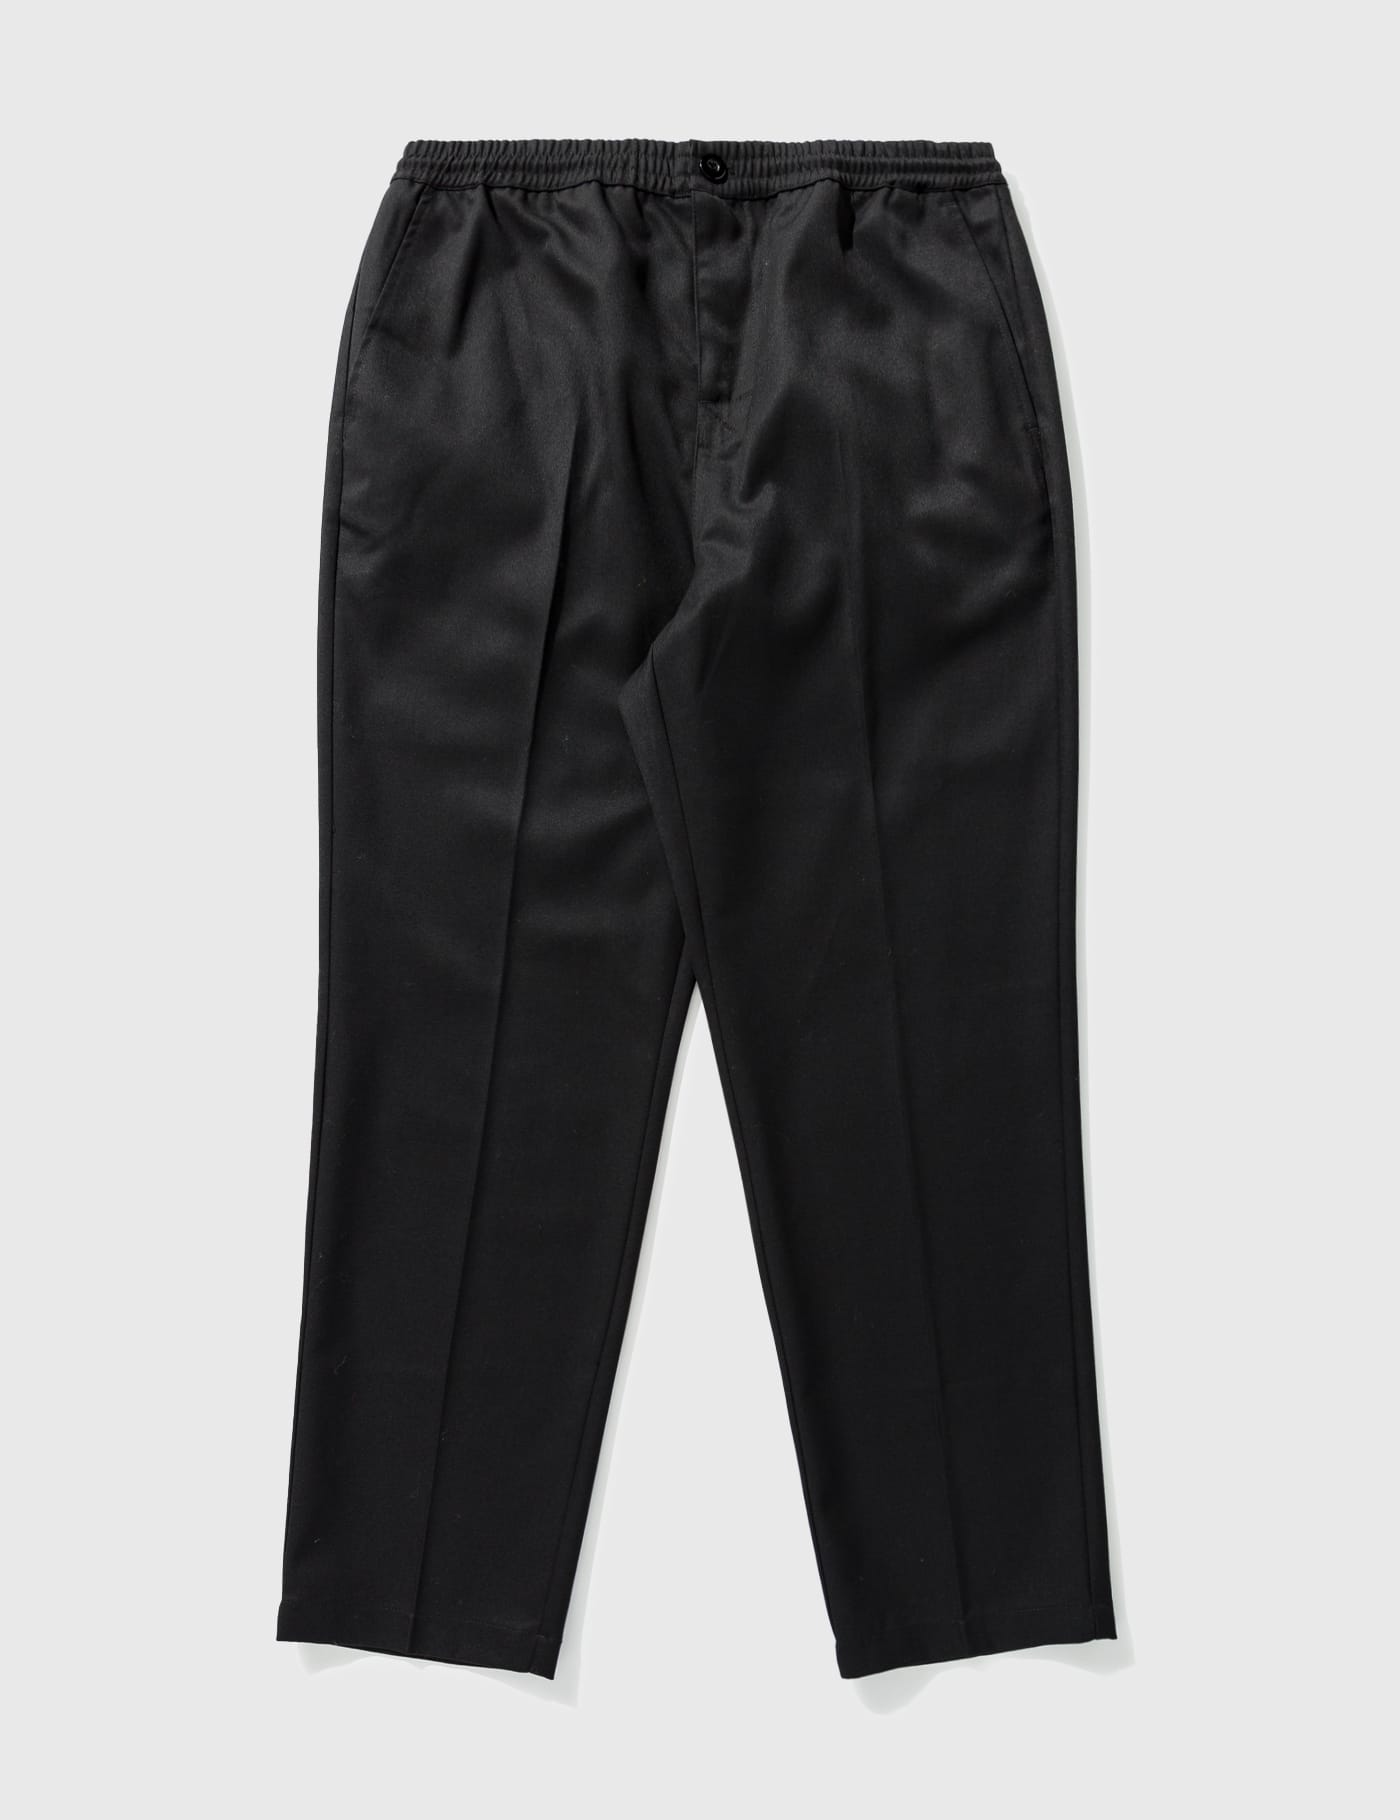 Stussy - Bryan Pants | HBX - Globally Curated Fashion and 